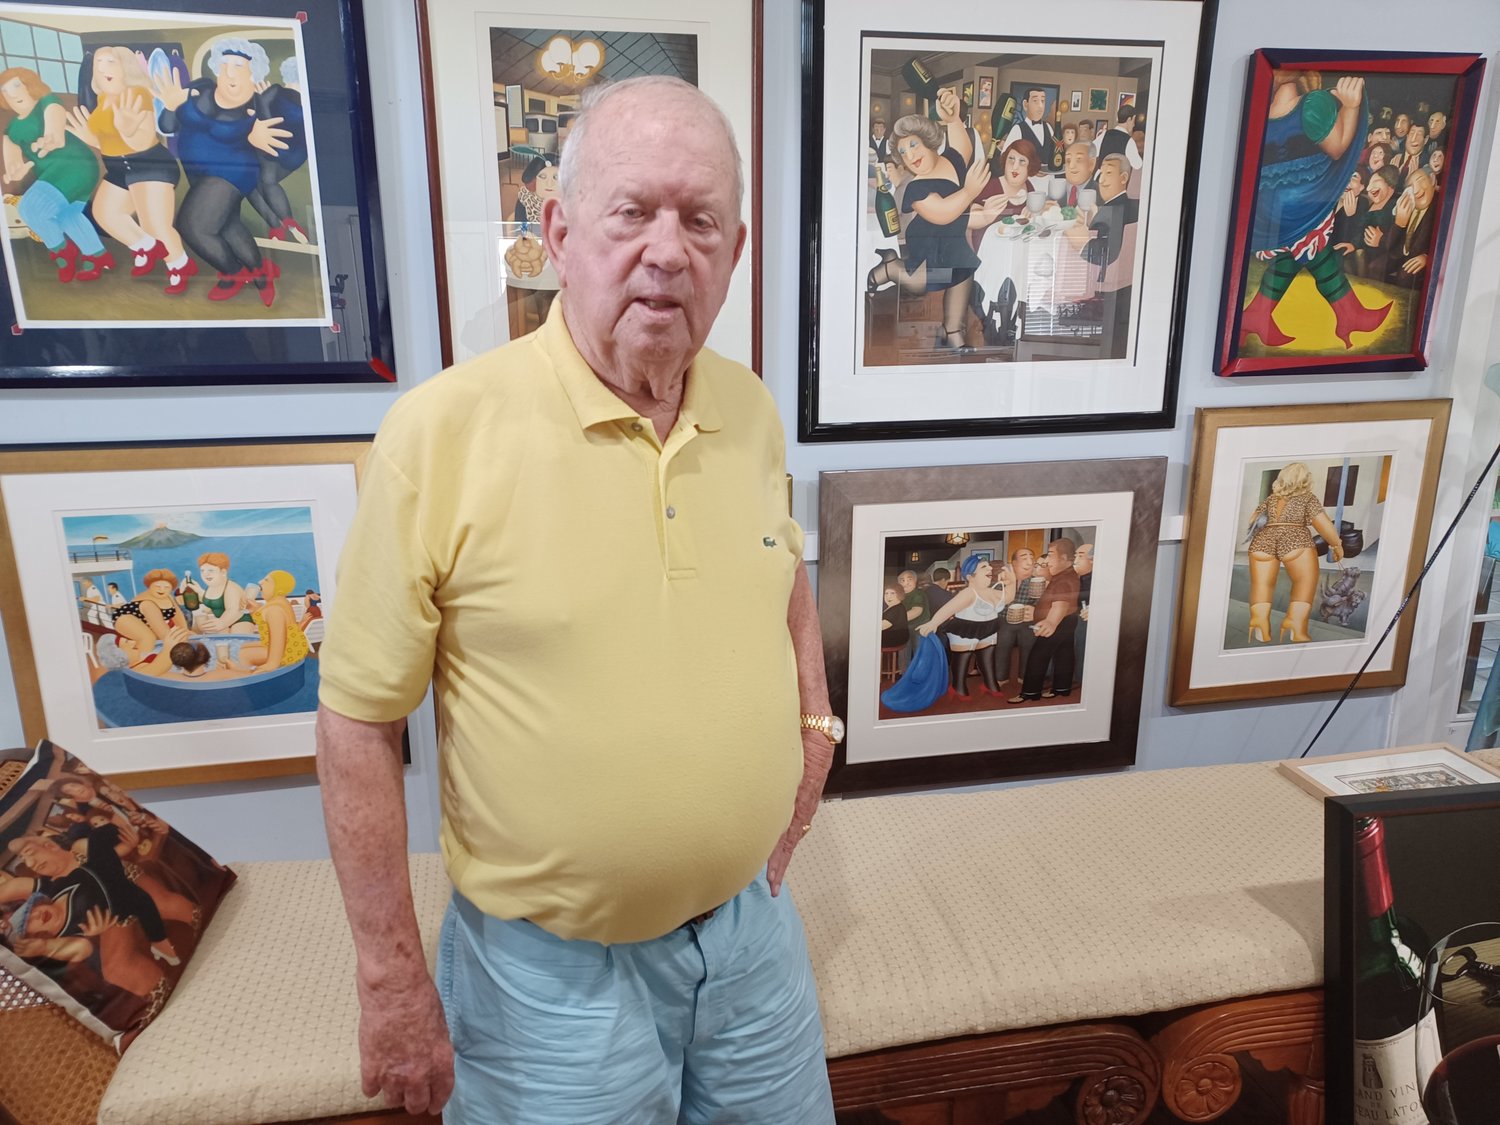 With original prints of Beryl Cook’s paintings behind him, J. Norman Henry stands in a room he has filled with art.